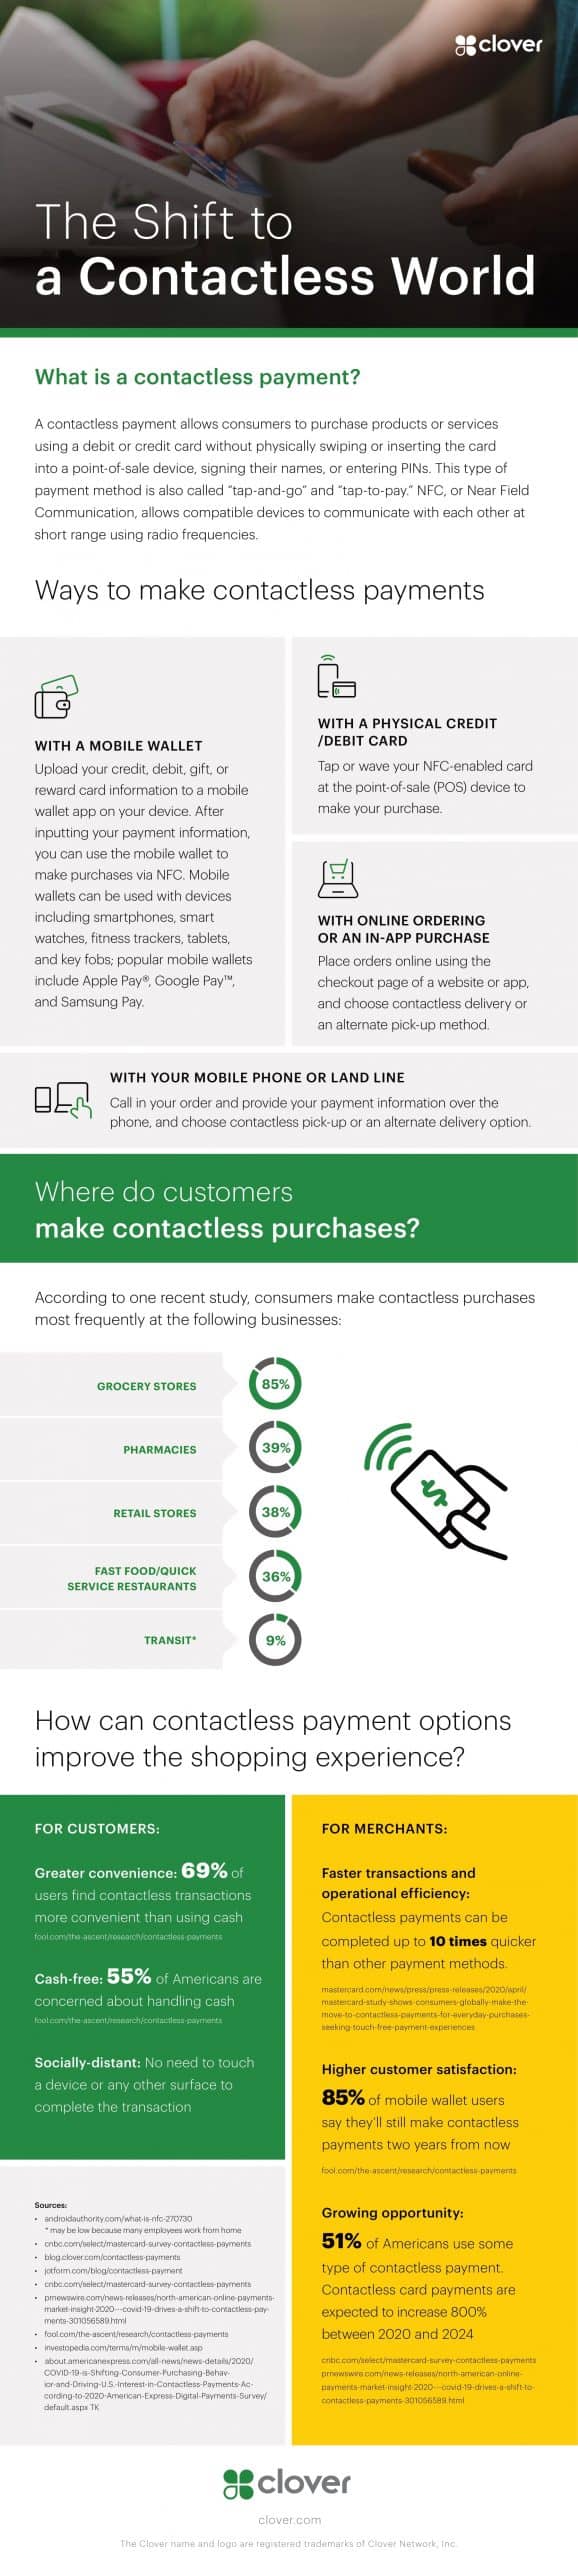 The Shift To A Contactless World